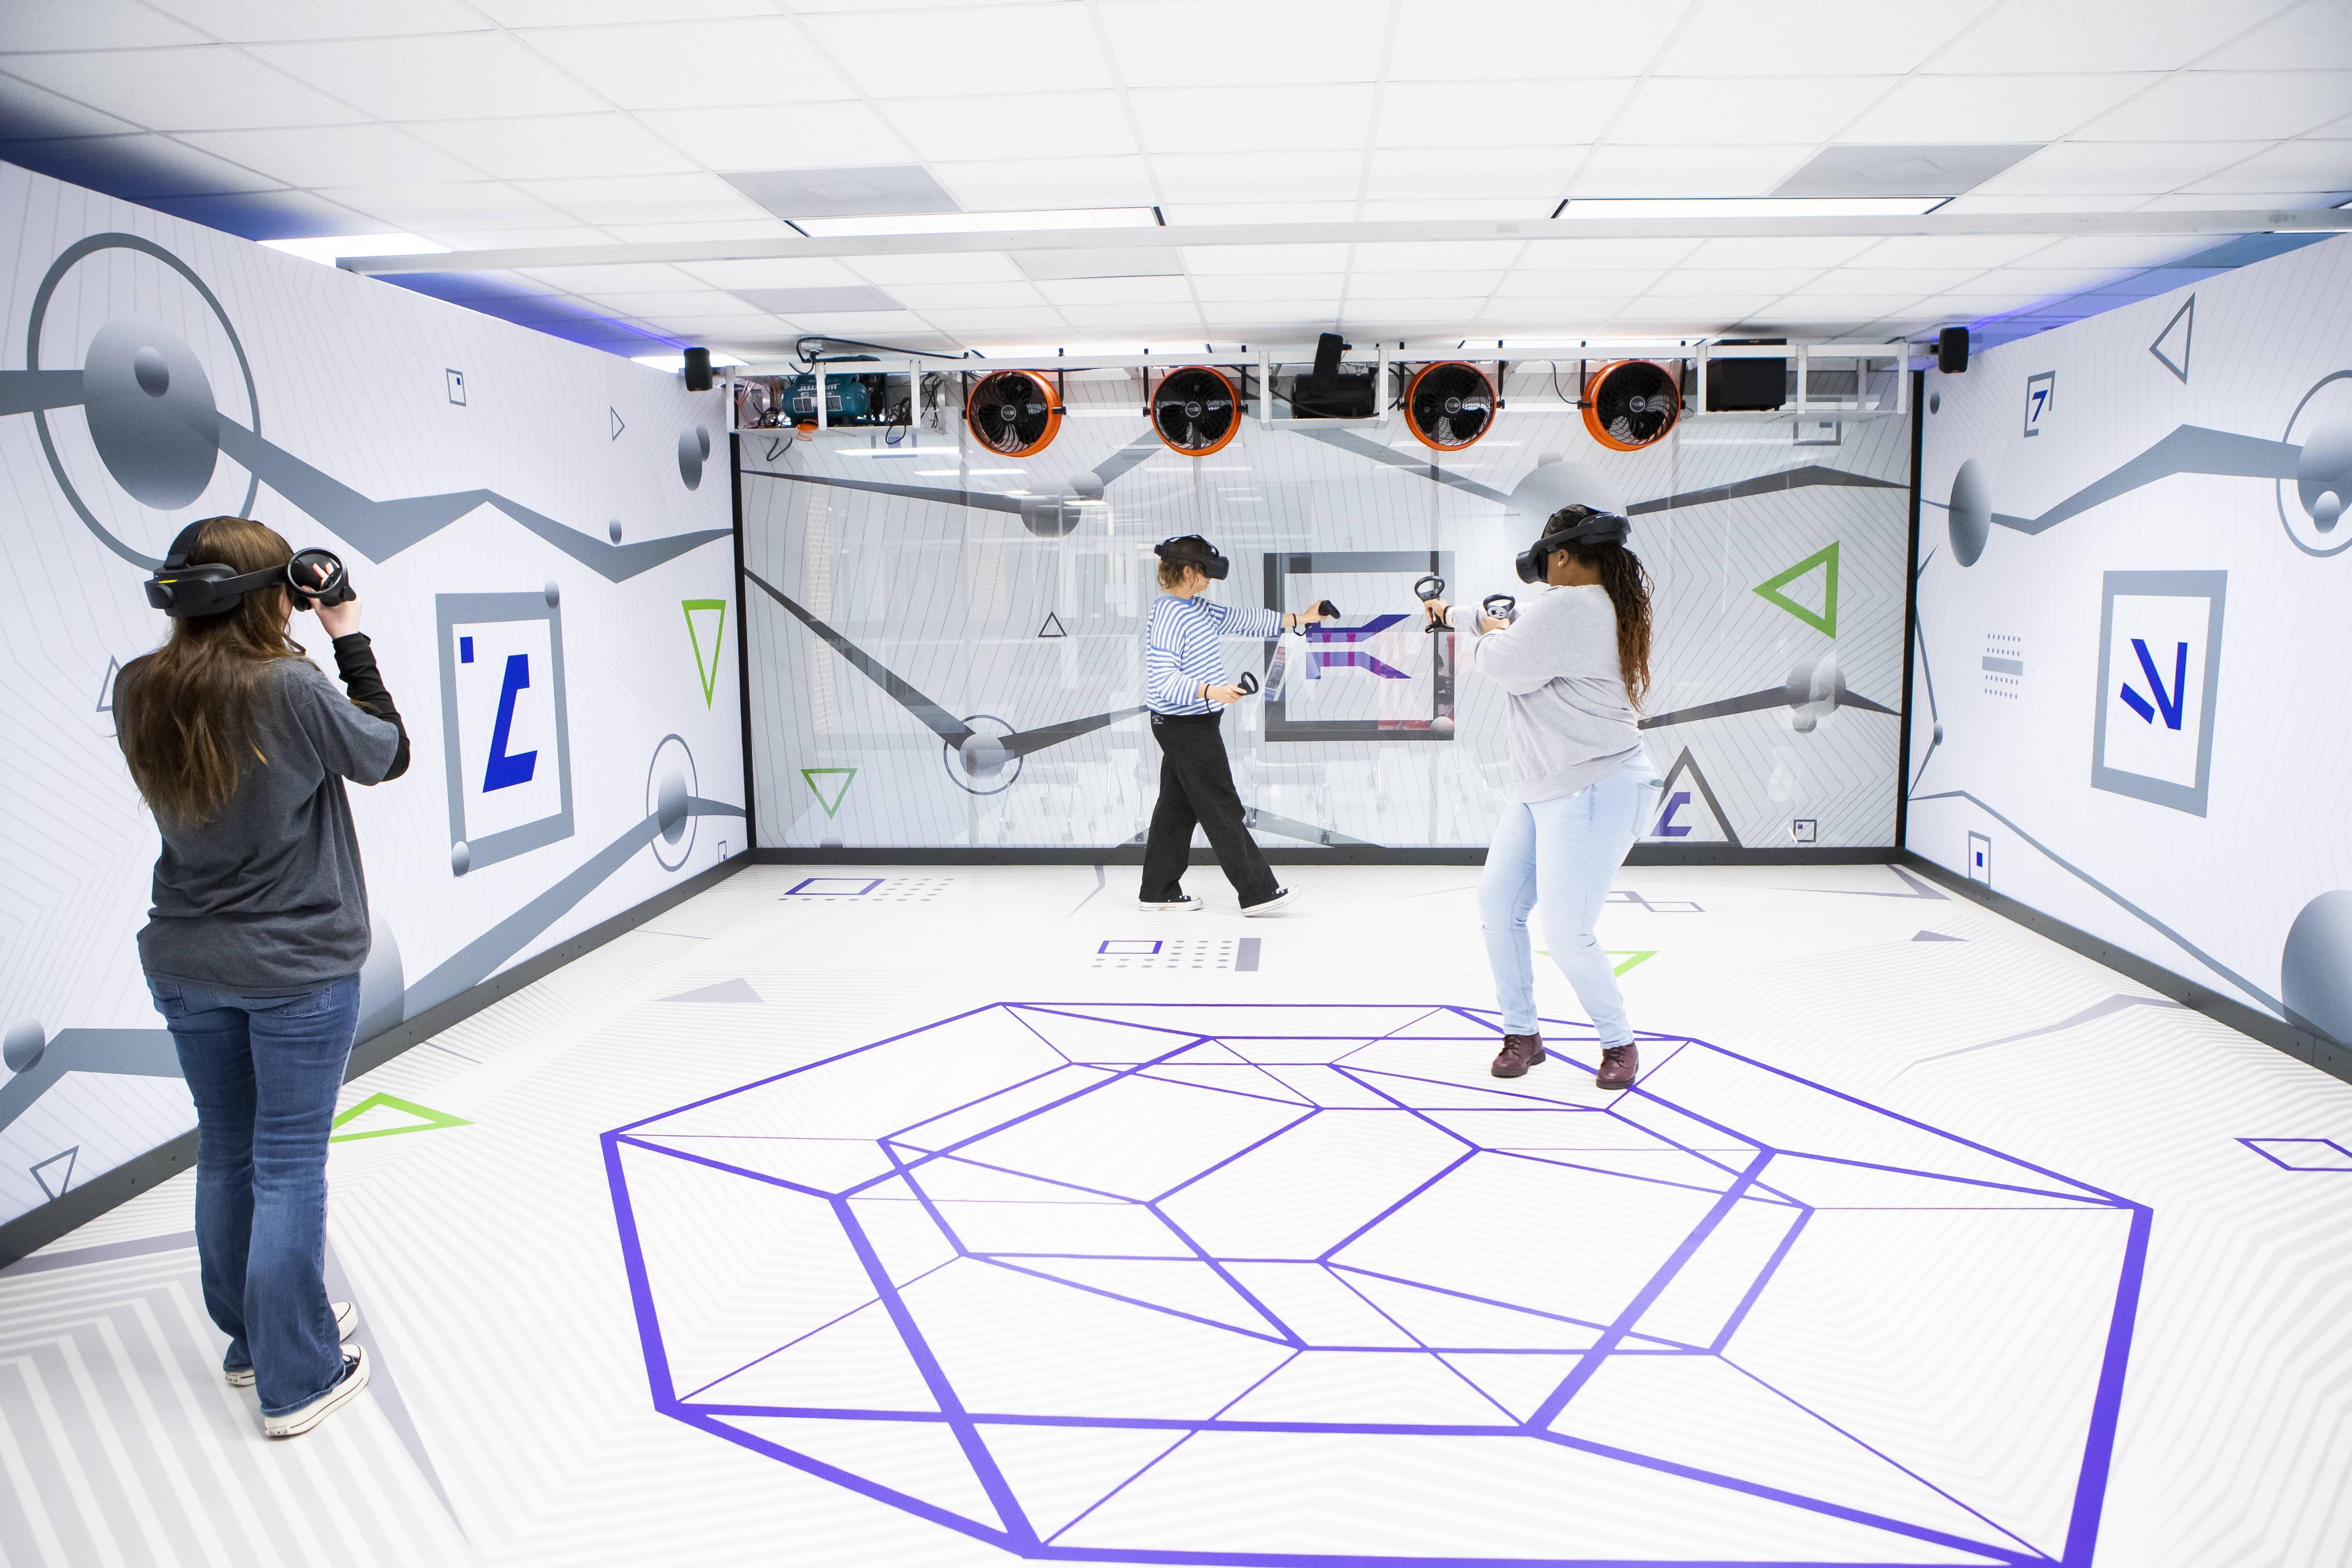 Three students playing a game in the Virtual Reality room.